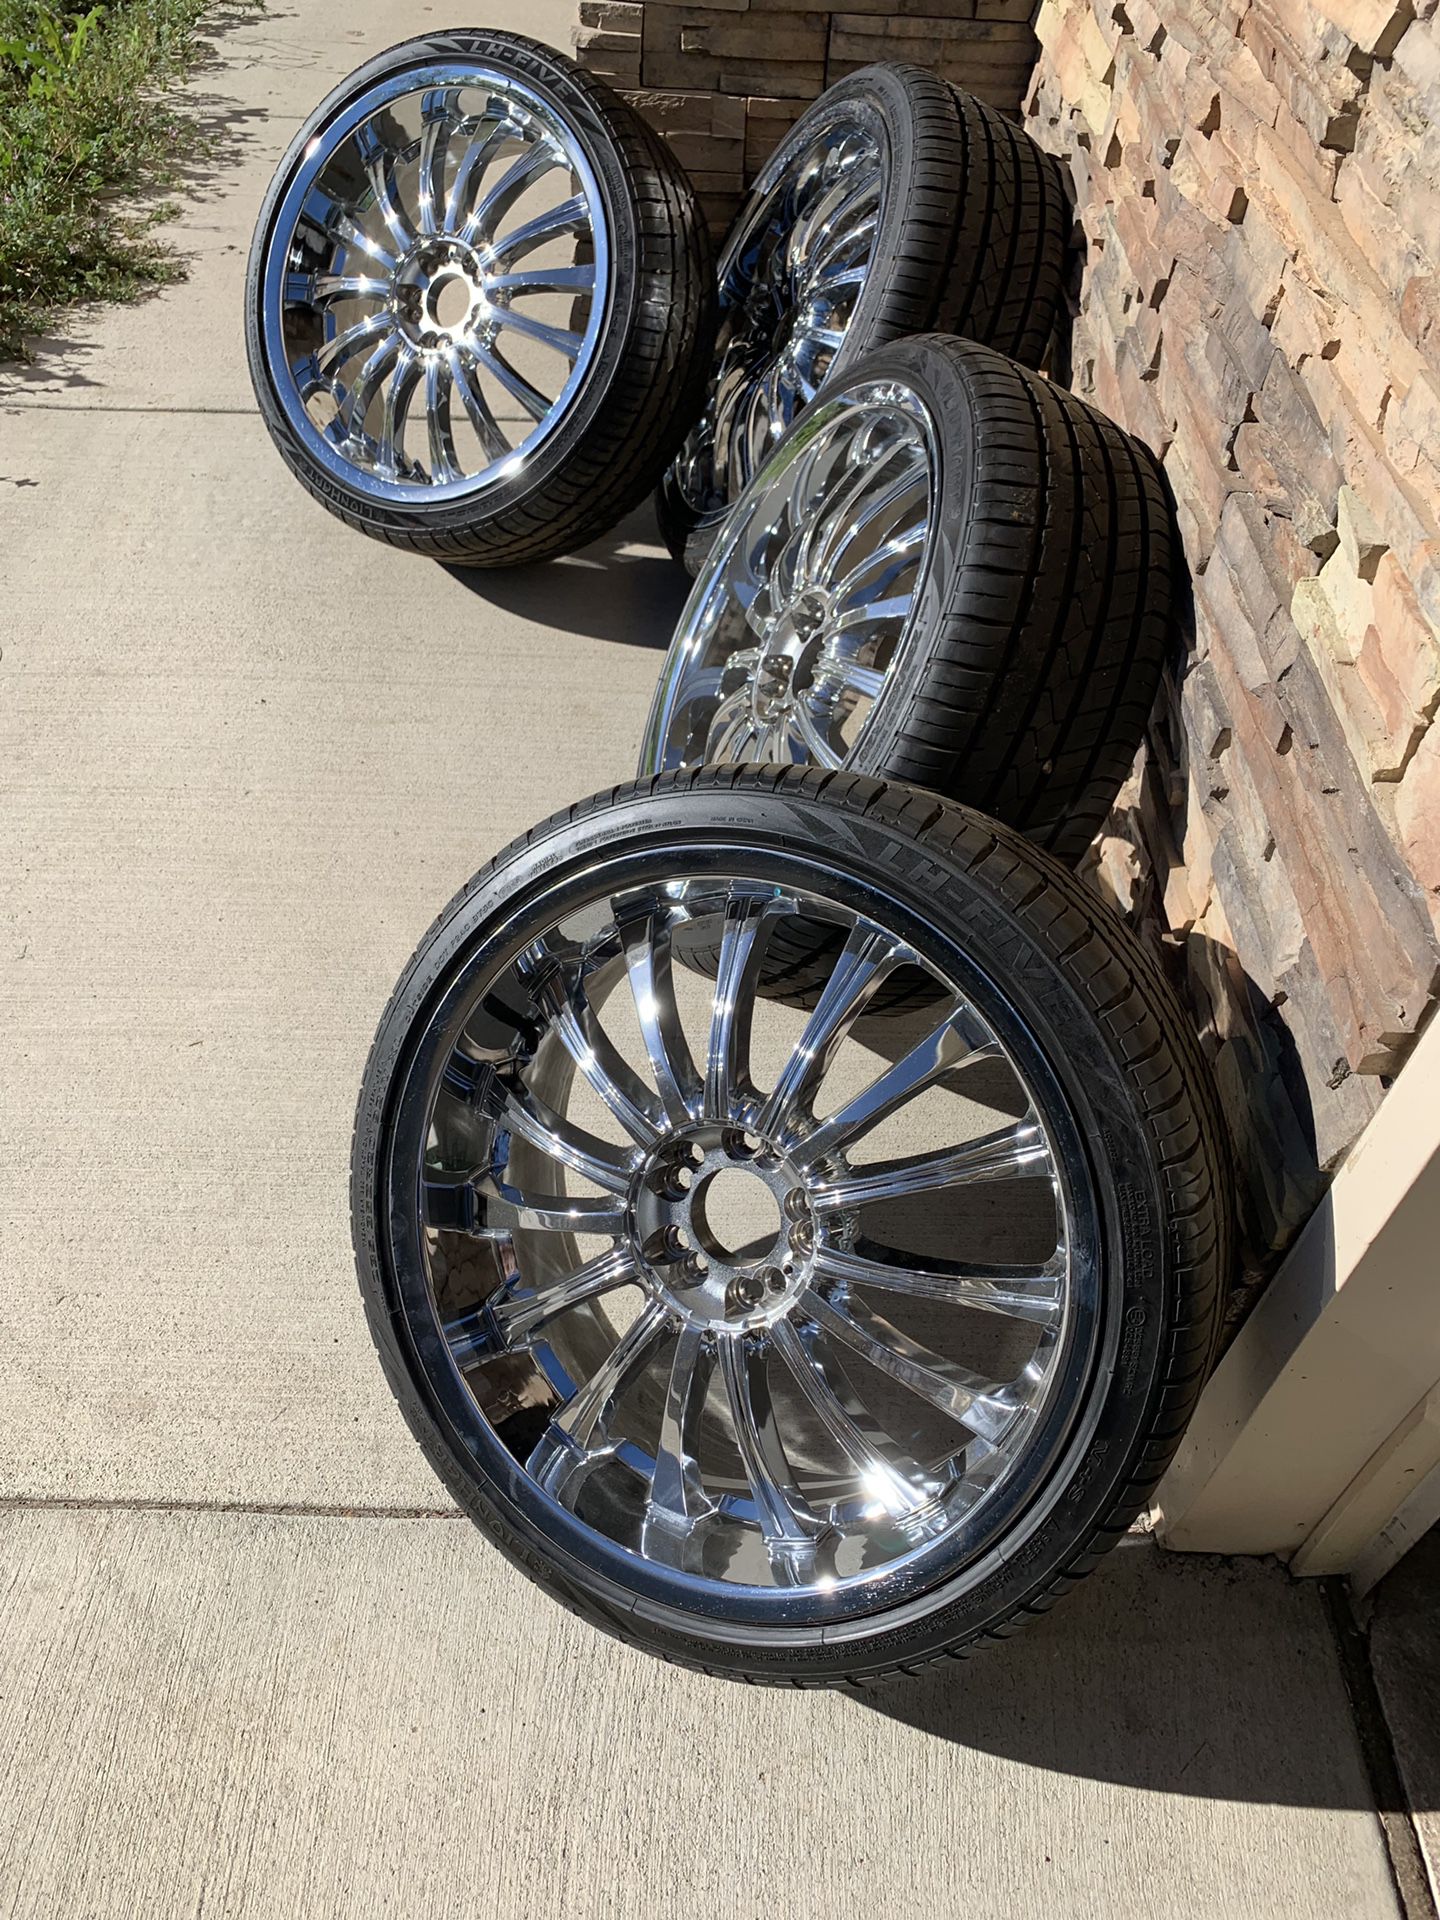 20” tires and rims